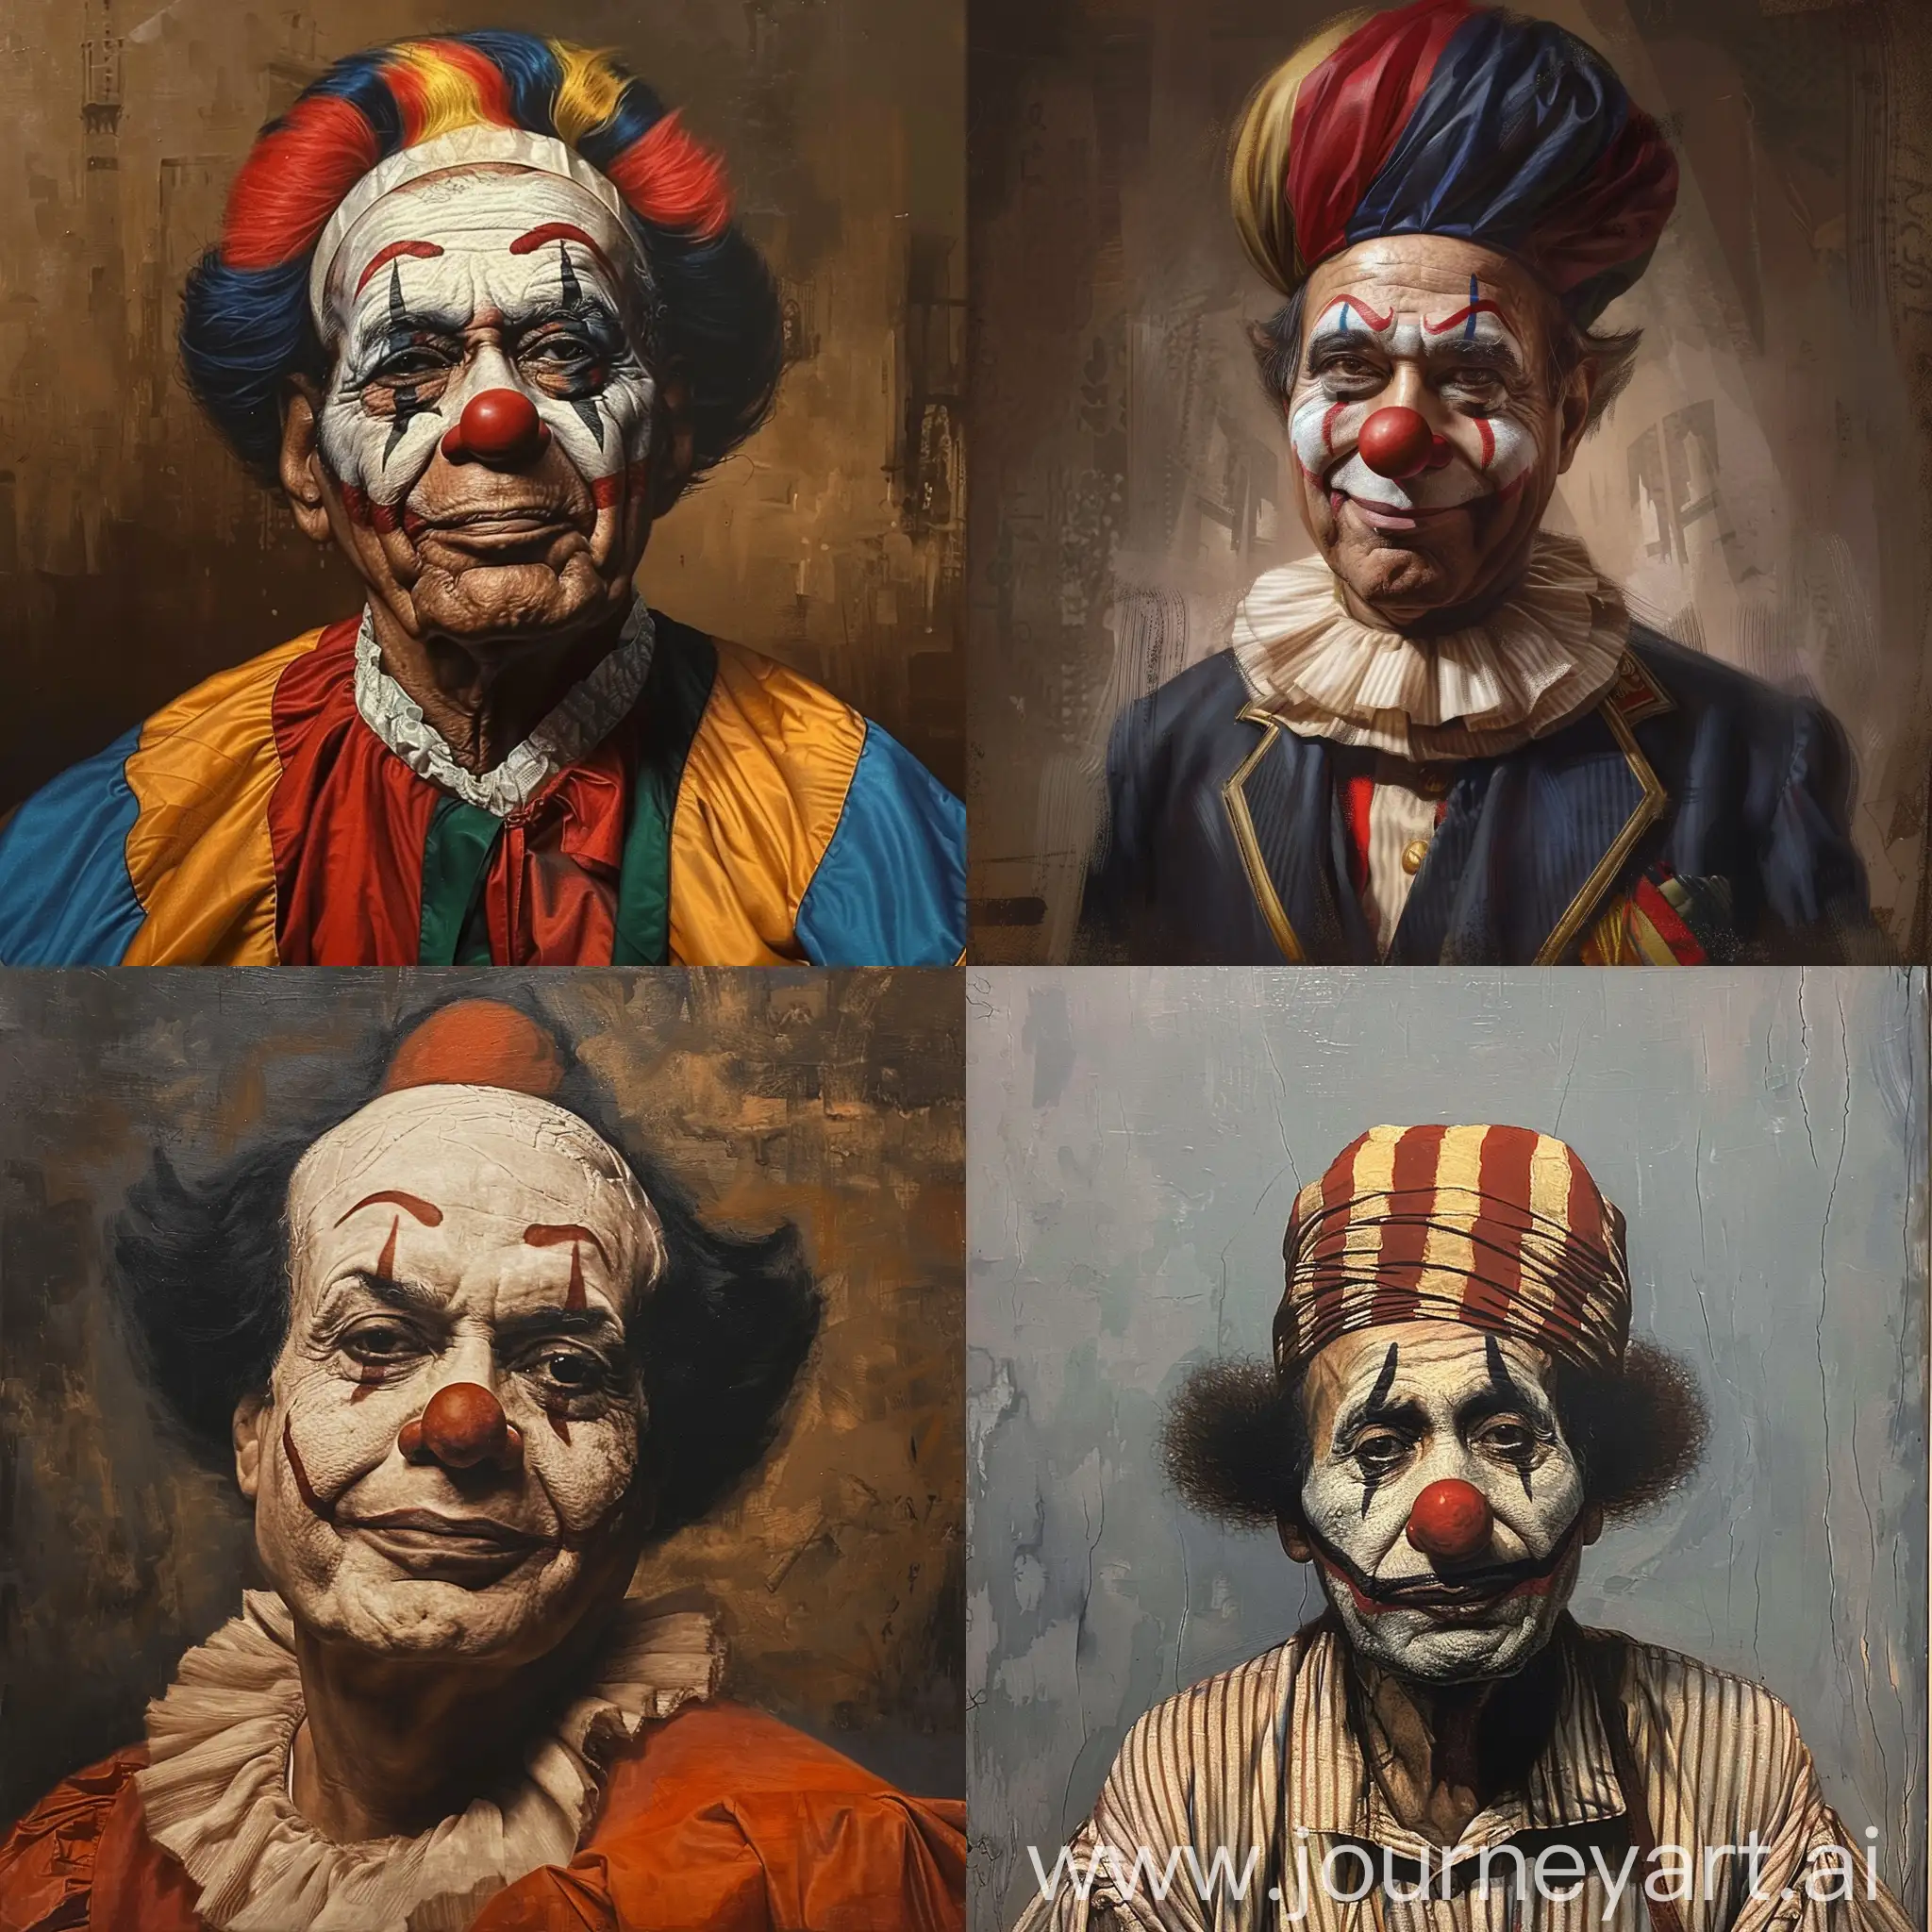 Abdel-Fattah-elSisi-Wearing-Clown-Clothes-Playful-Portrayal-of-the-Egyptian-President